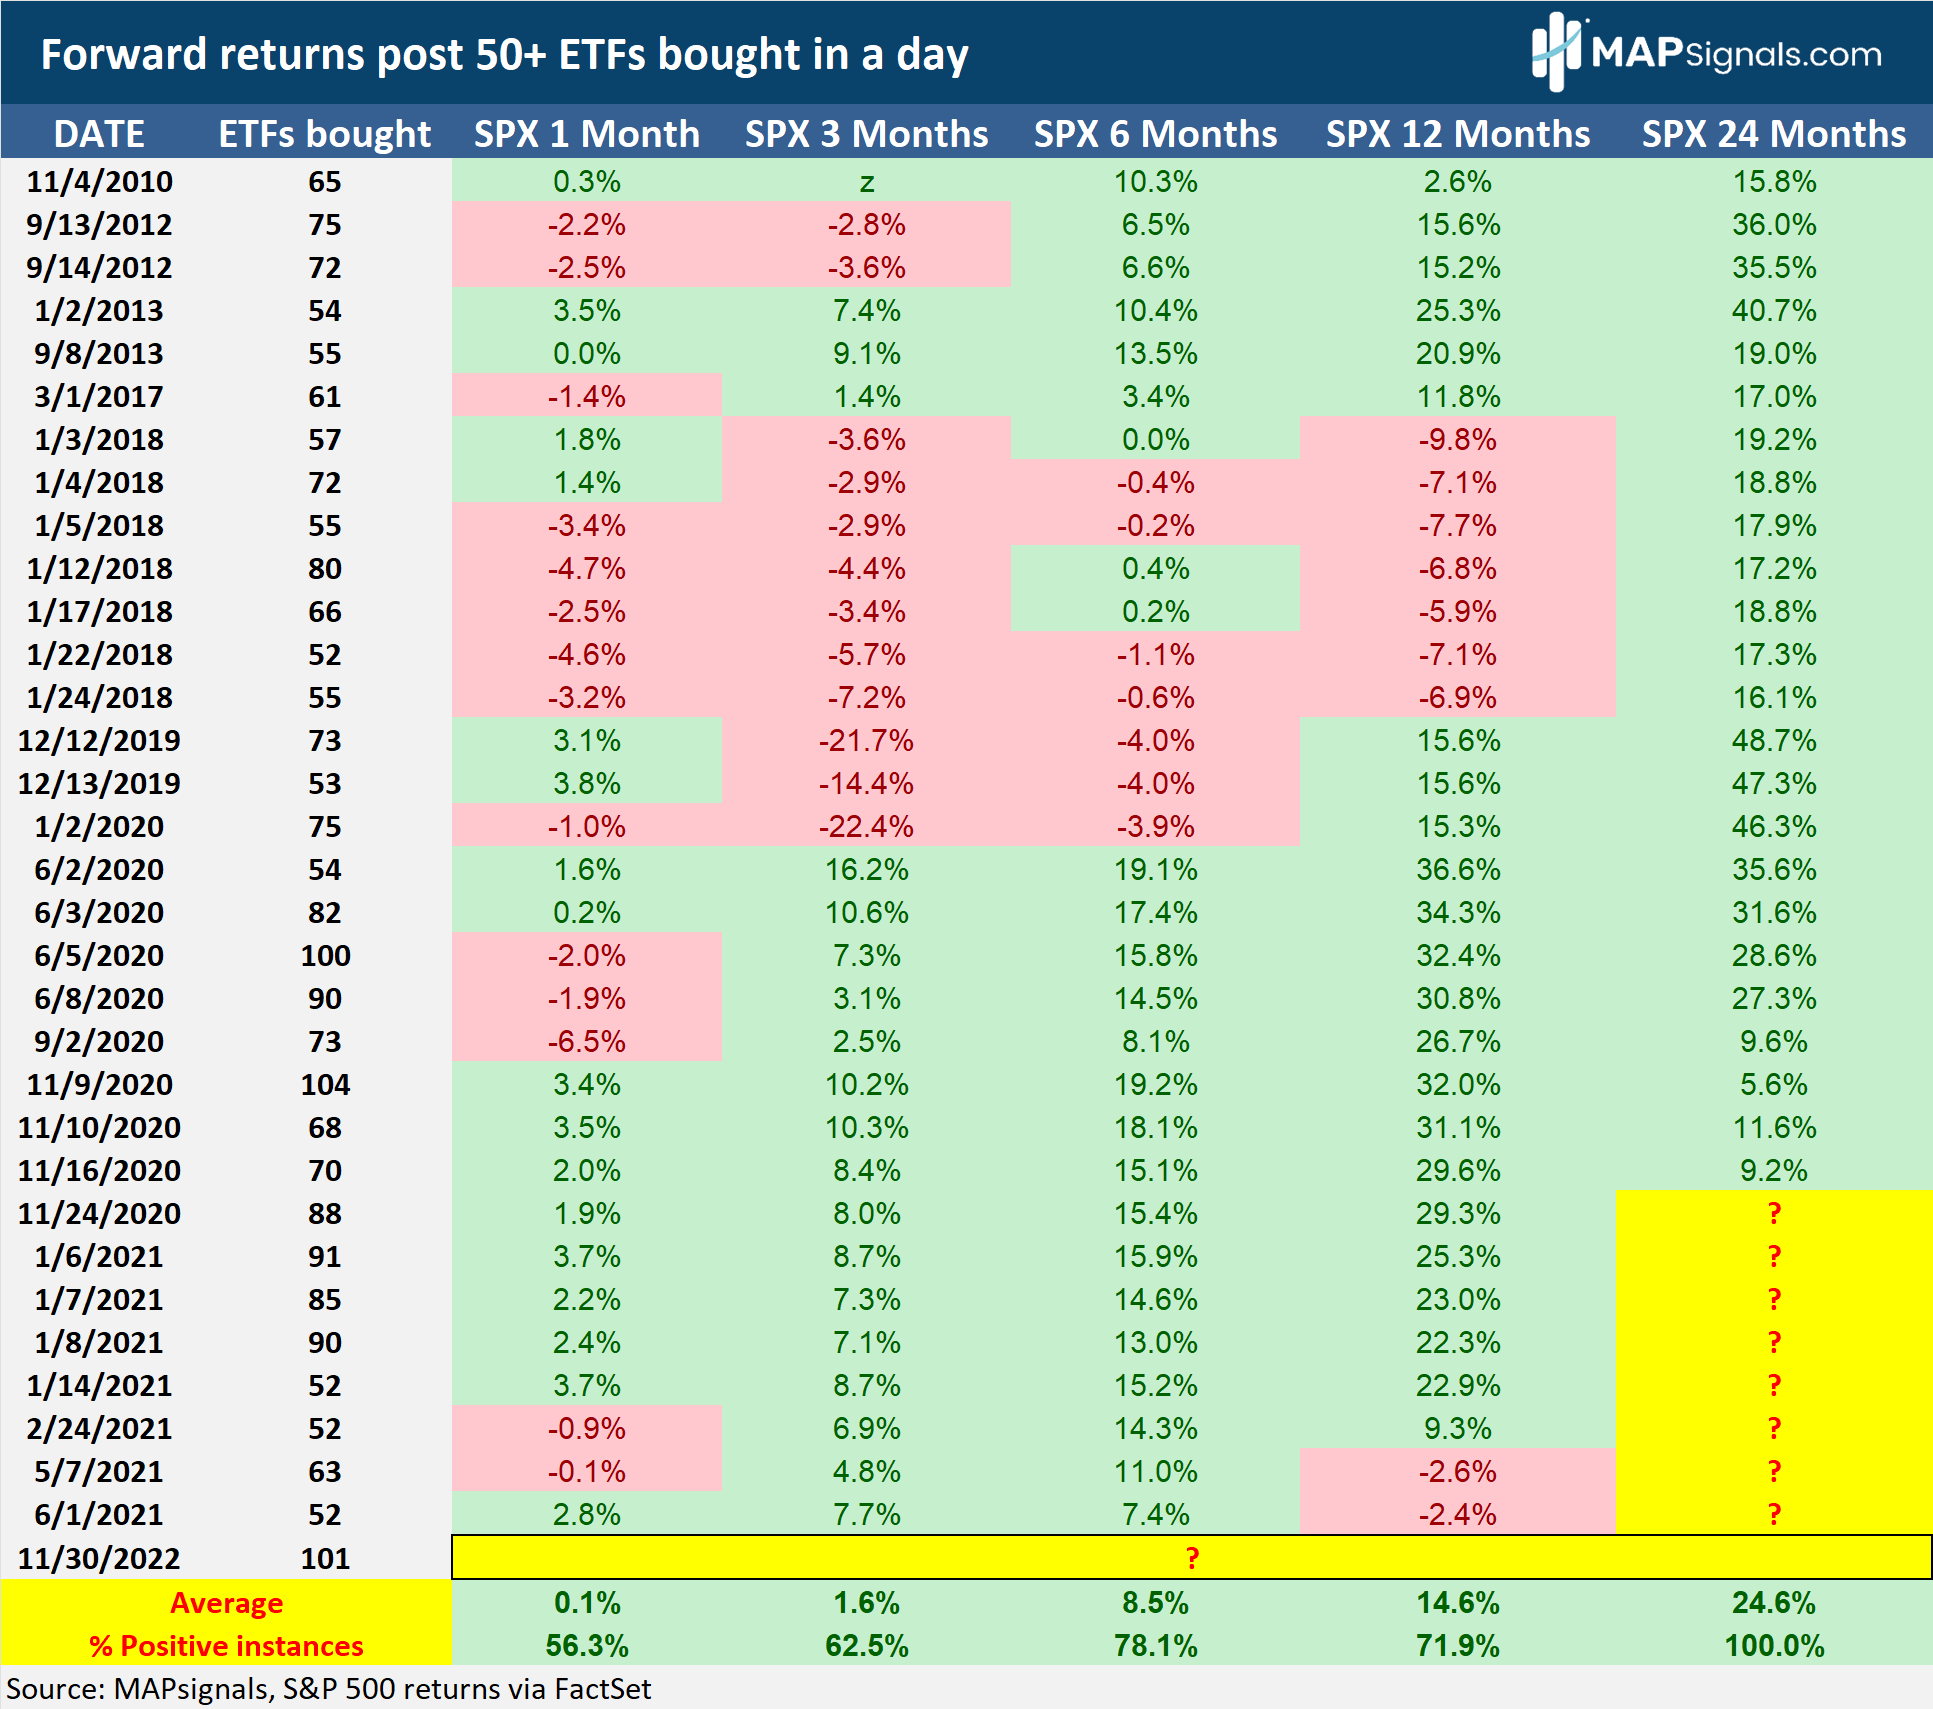 Forward Returns Post 50+ ETFs Bought in a Day | MAPsignals